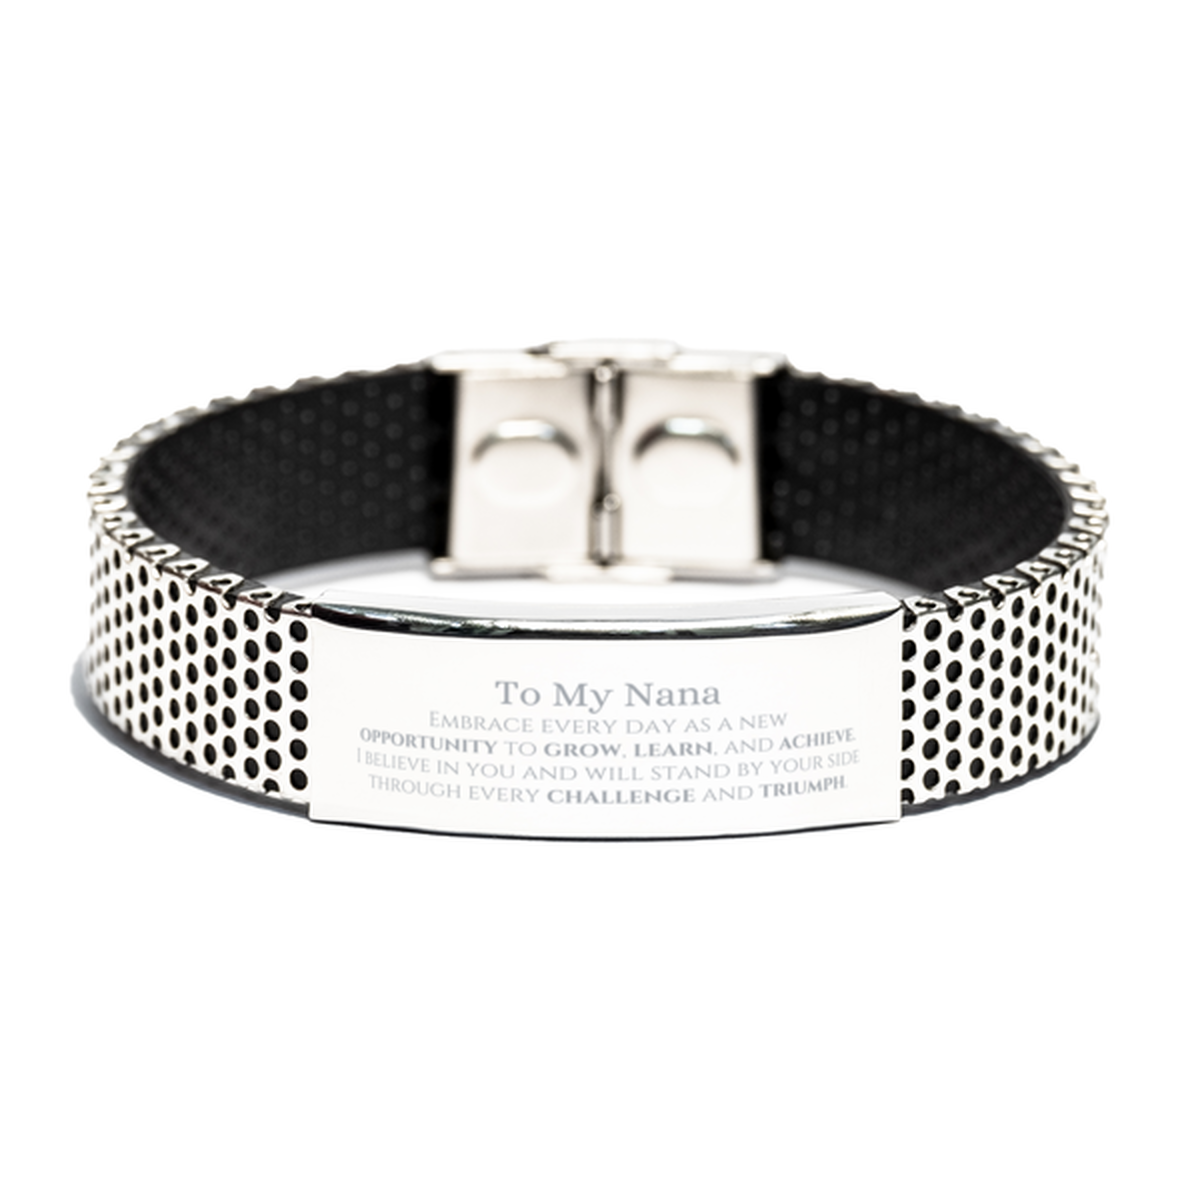 To My Nana Gifts, I believe in you and will stand by your side, Inspirational Stainless Steel Bracelet For Nana, Birthday Christmas Motivational Nana Gifts